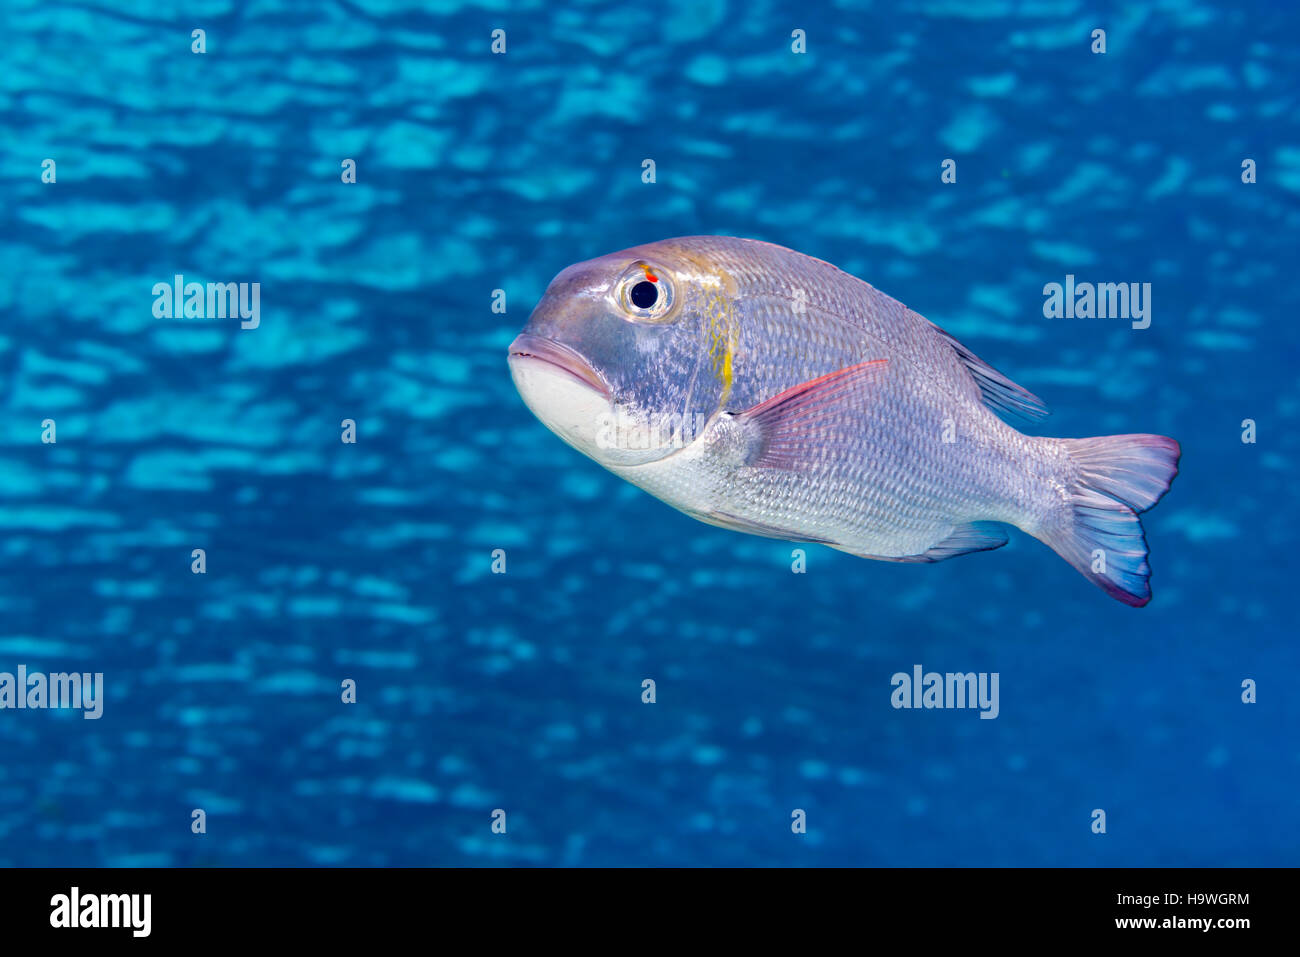 Bigeye emperor, or humpnose bigeye bream (Monotaxis grandoculis) swimming in blue rippled water just below the surface Stock Photo